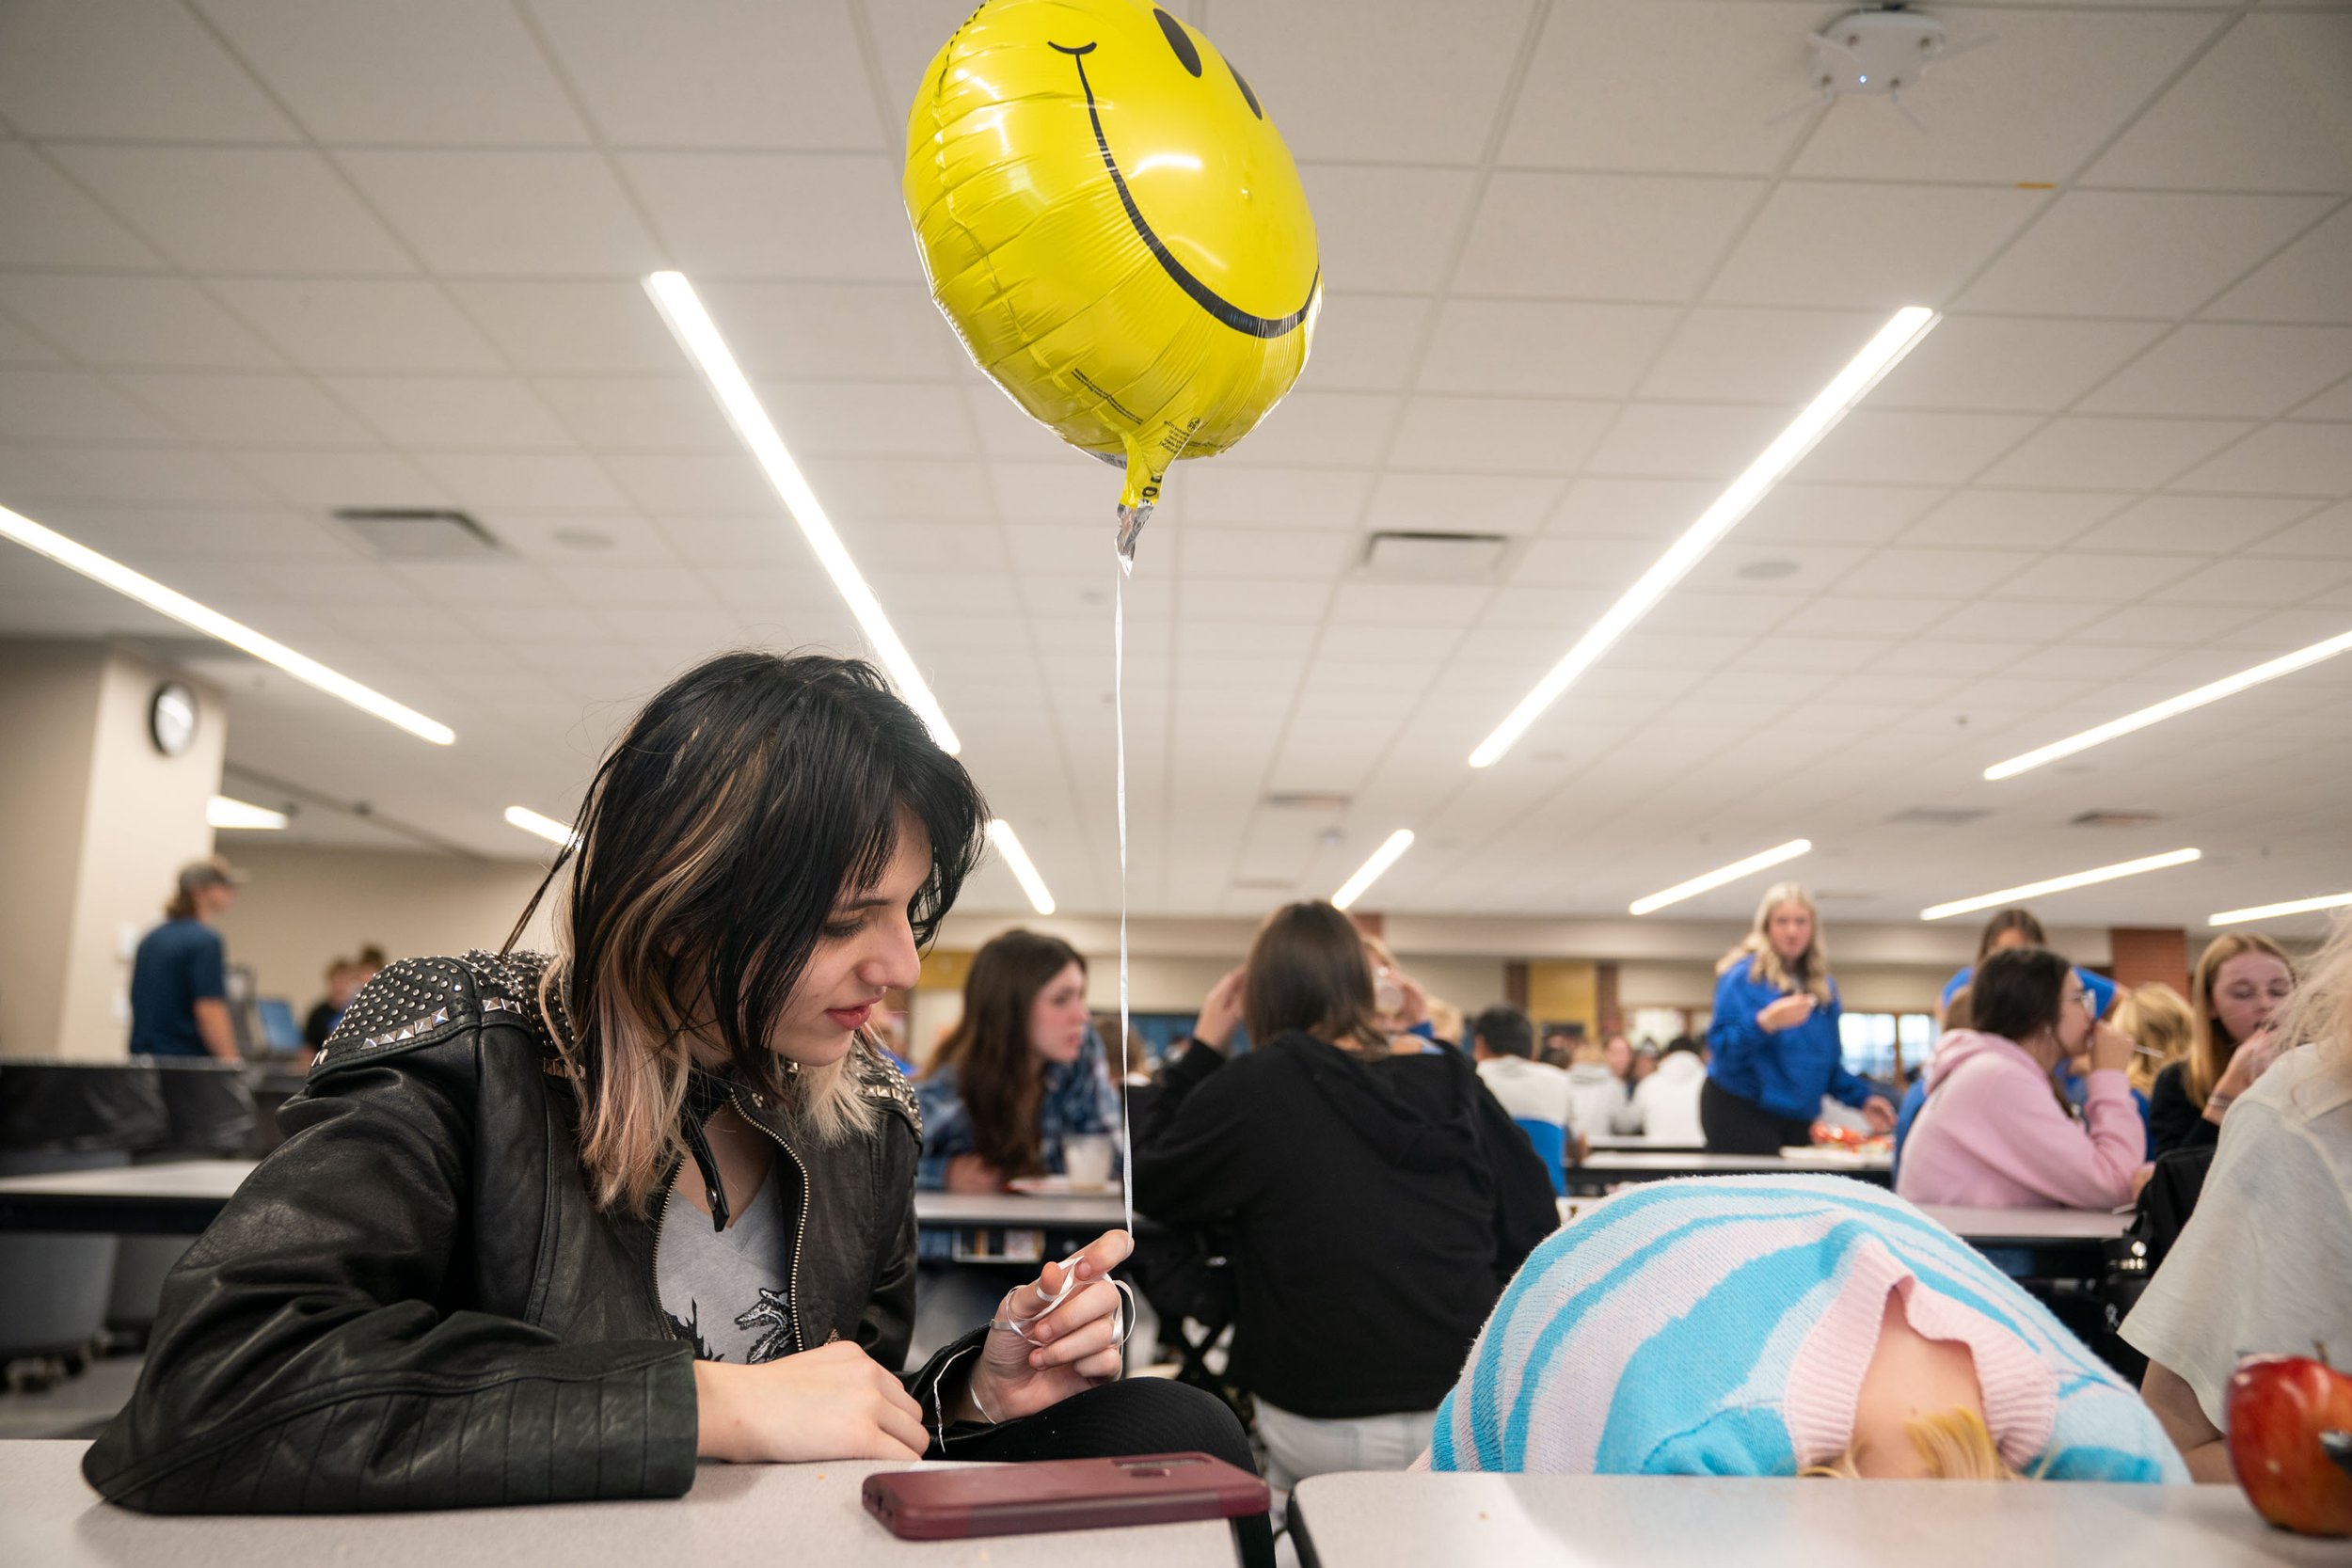  Irie Nordstrom, 15, holds a smiley face balloon while Lily Nickel, 15, retreats under the cafeteria table during their lunch break after a pep fest, a gathering of students to encourage school support typically before a sports event, at Brainerd Hig